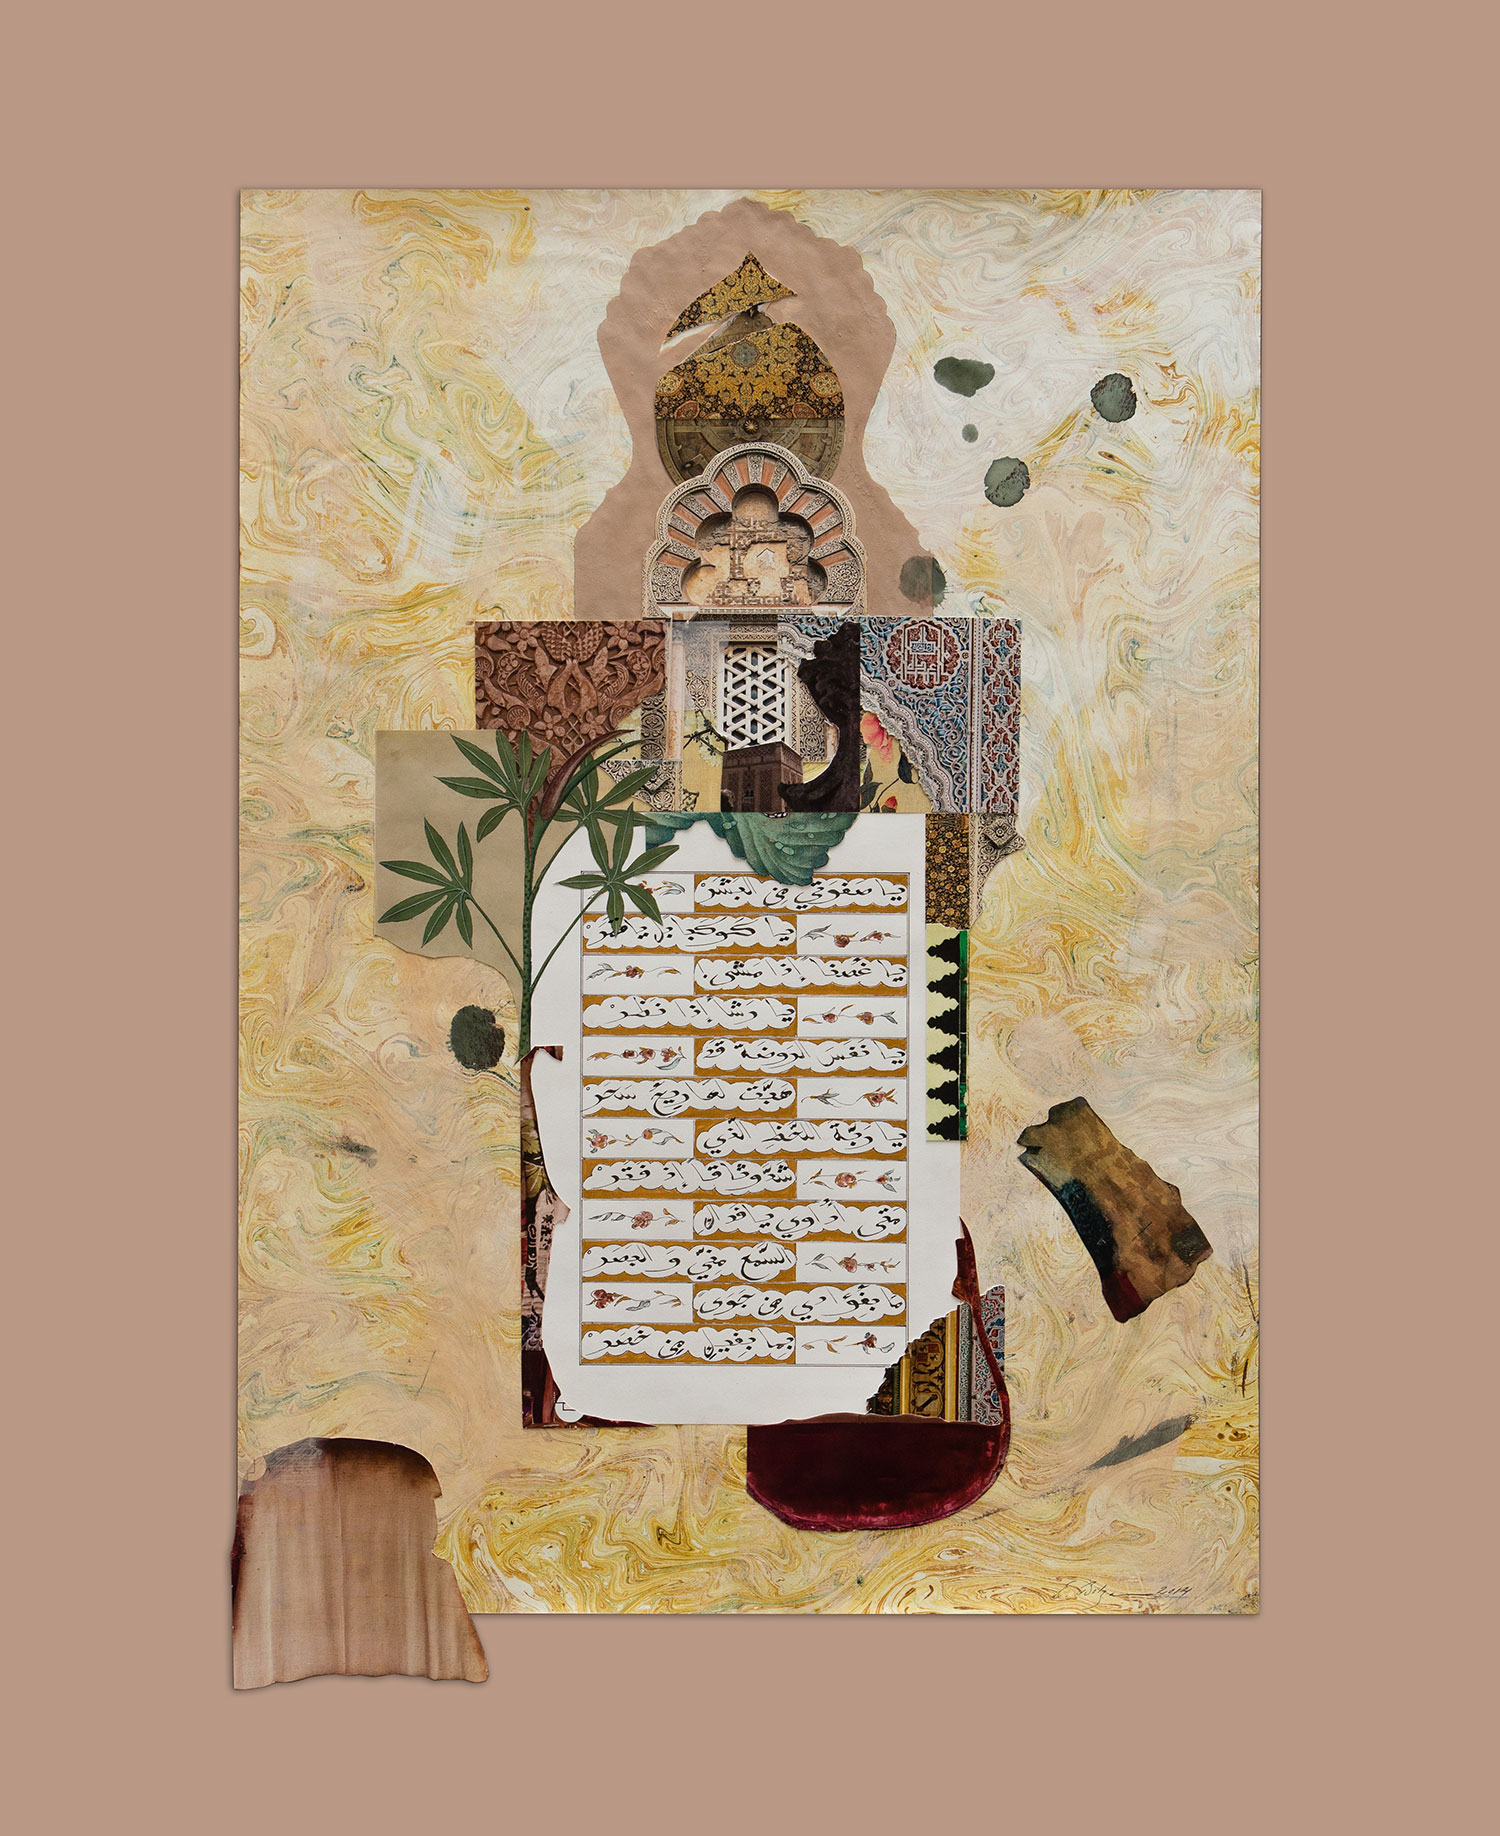   The Beloved (Reflections on The Poet King)  Paper, Iranian ink, gold, watercolour, gesso and tempera on hand dyed and painted paper 101 x 81.5 cm 2014 